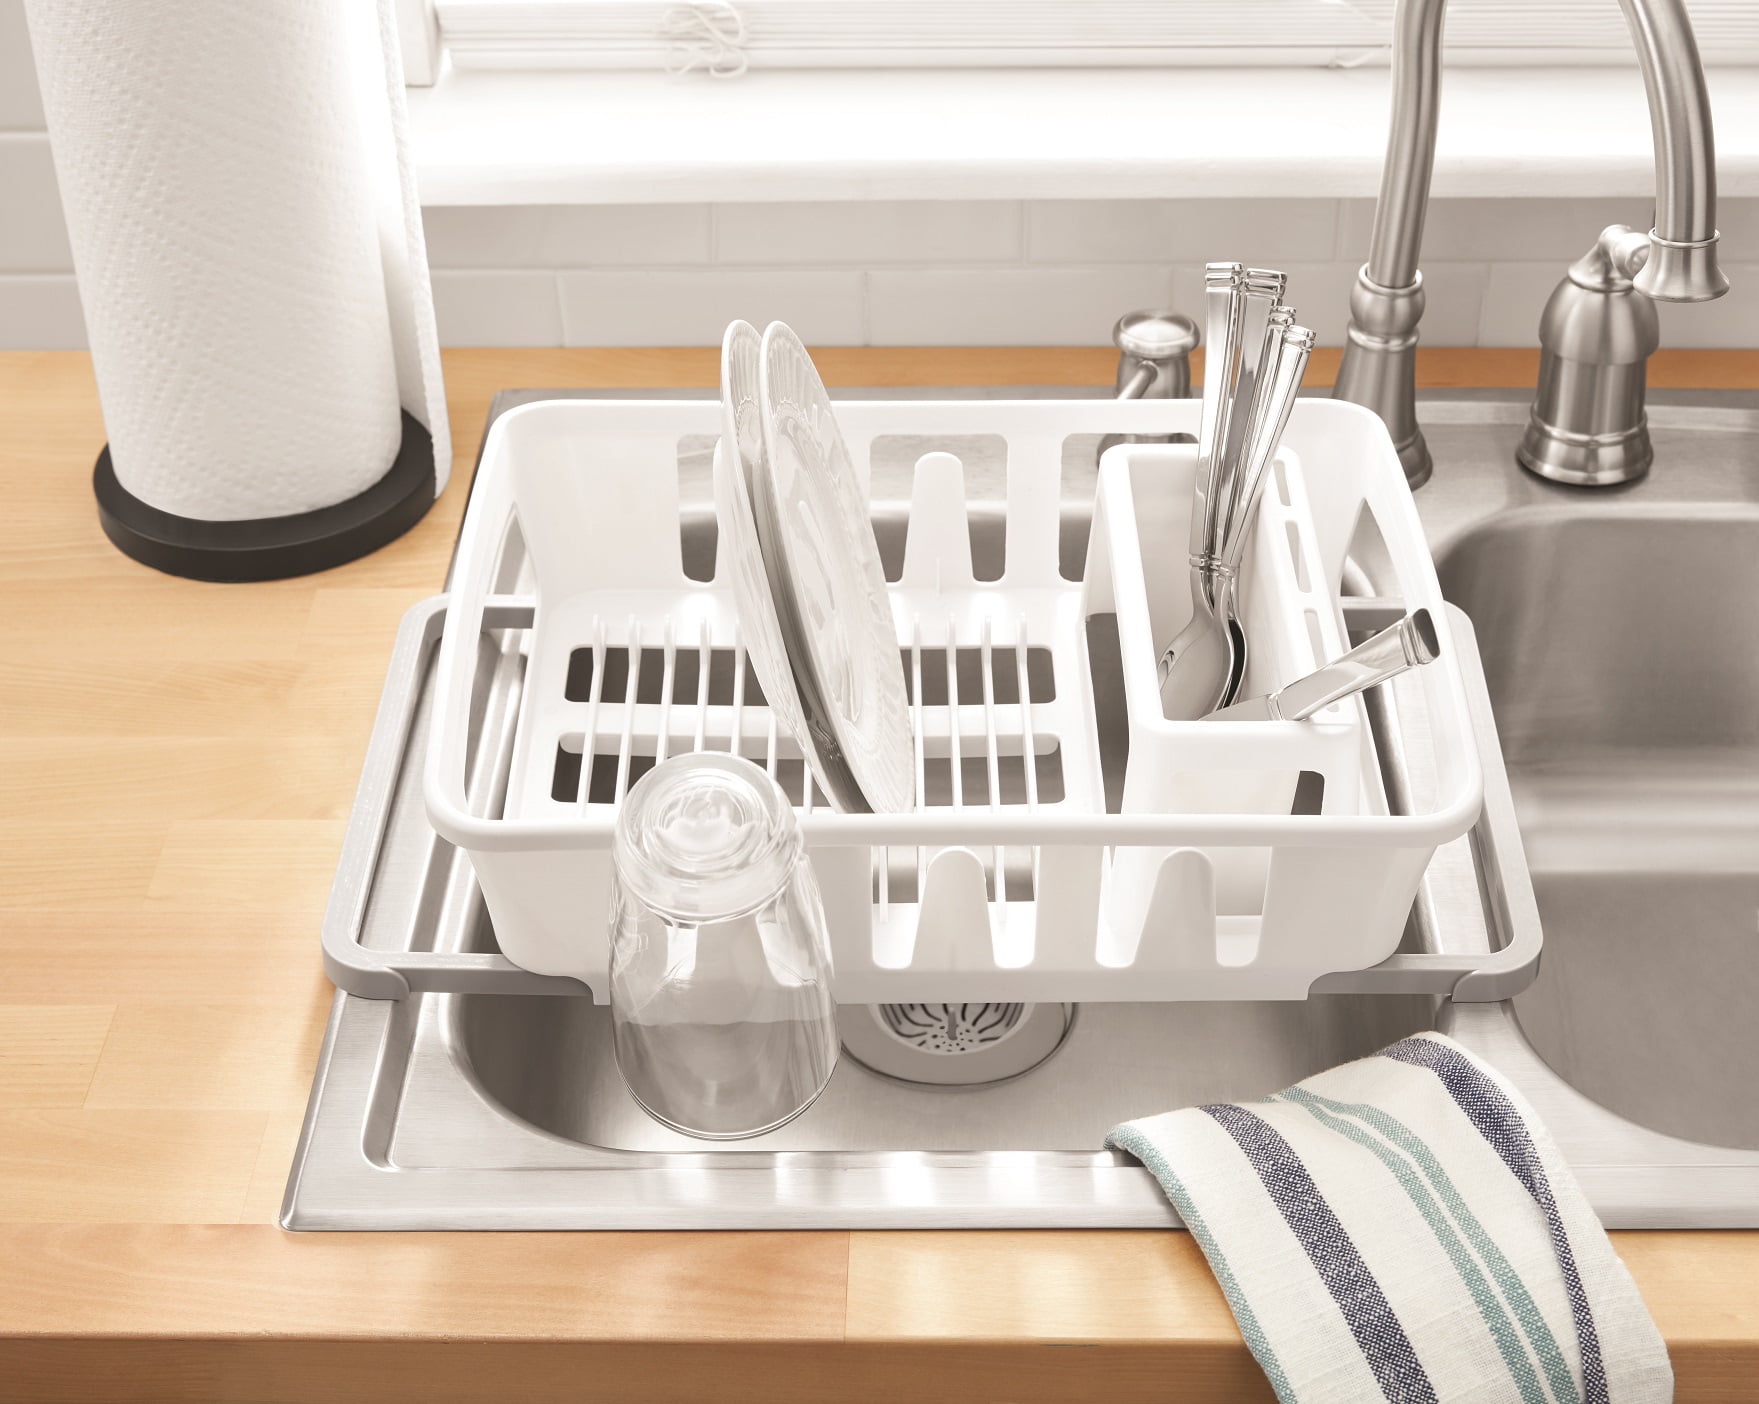 Mainstays Roll Up Kitchen Sink Drying Rack, Stainless-Steel and Silicone